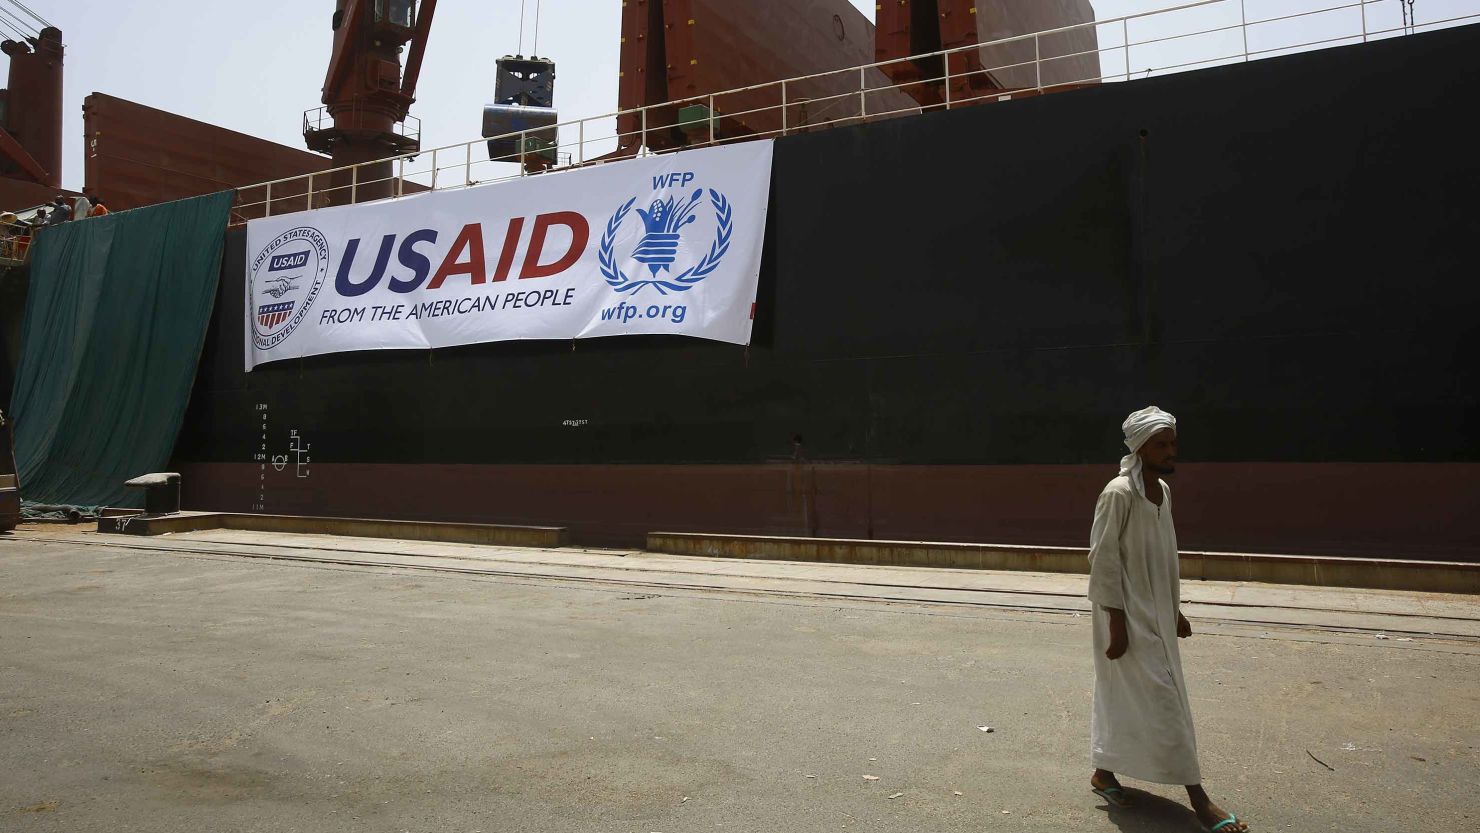 A delivery of 47,500 metric tons of sorghum from USAID at Port Sudan on May 26, 2015.